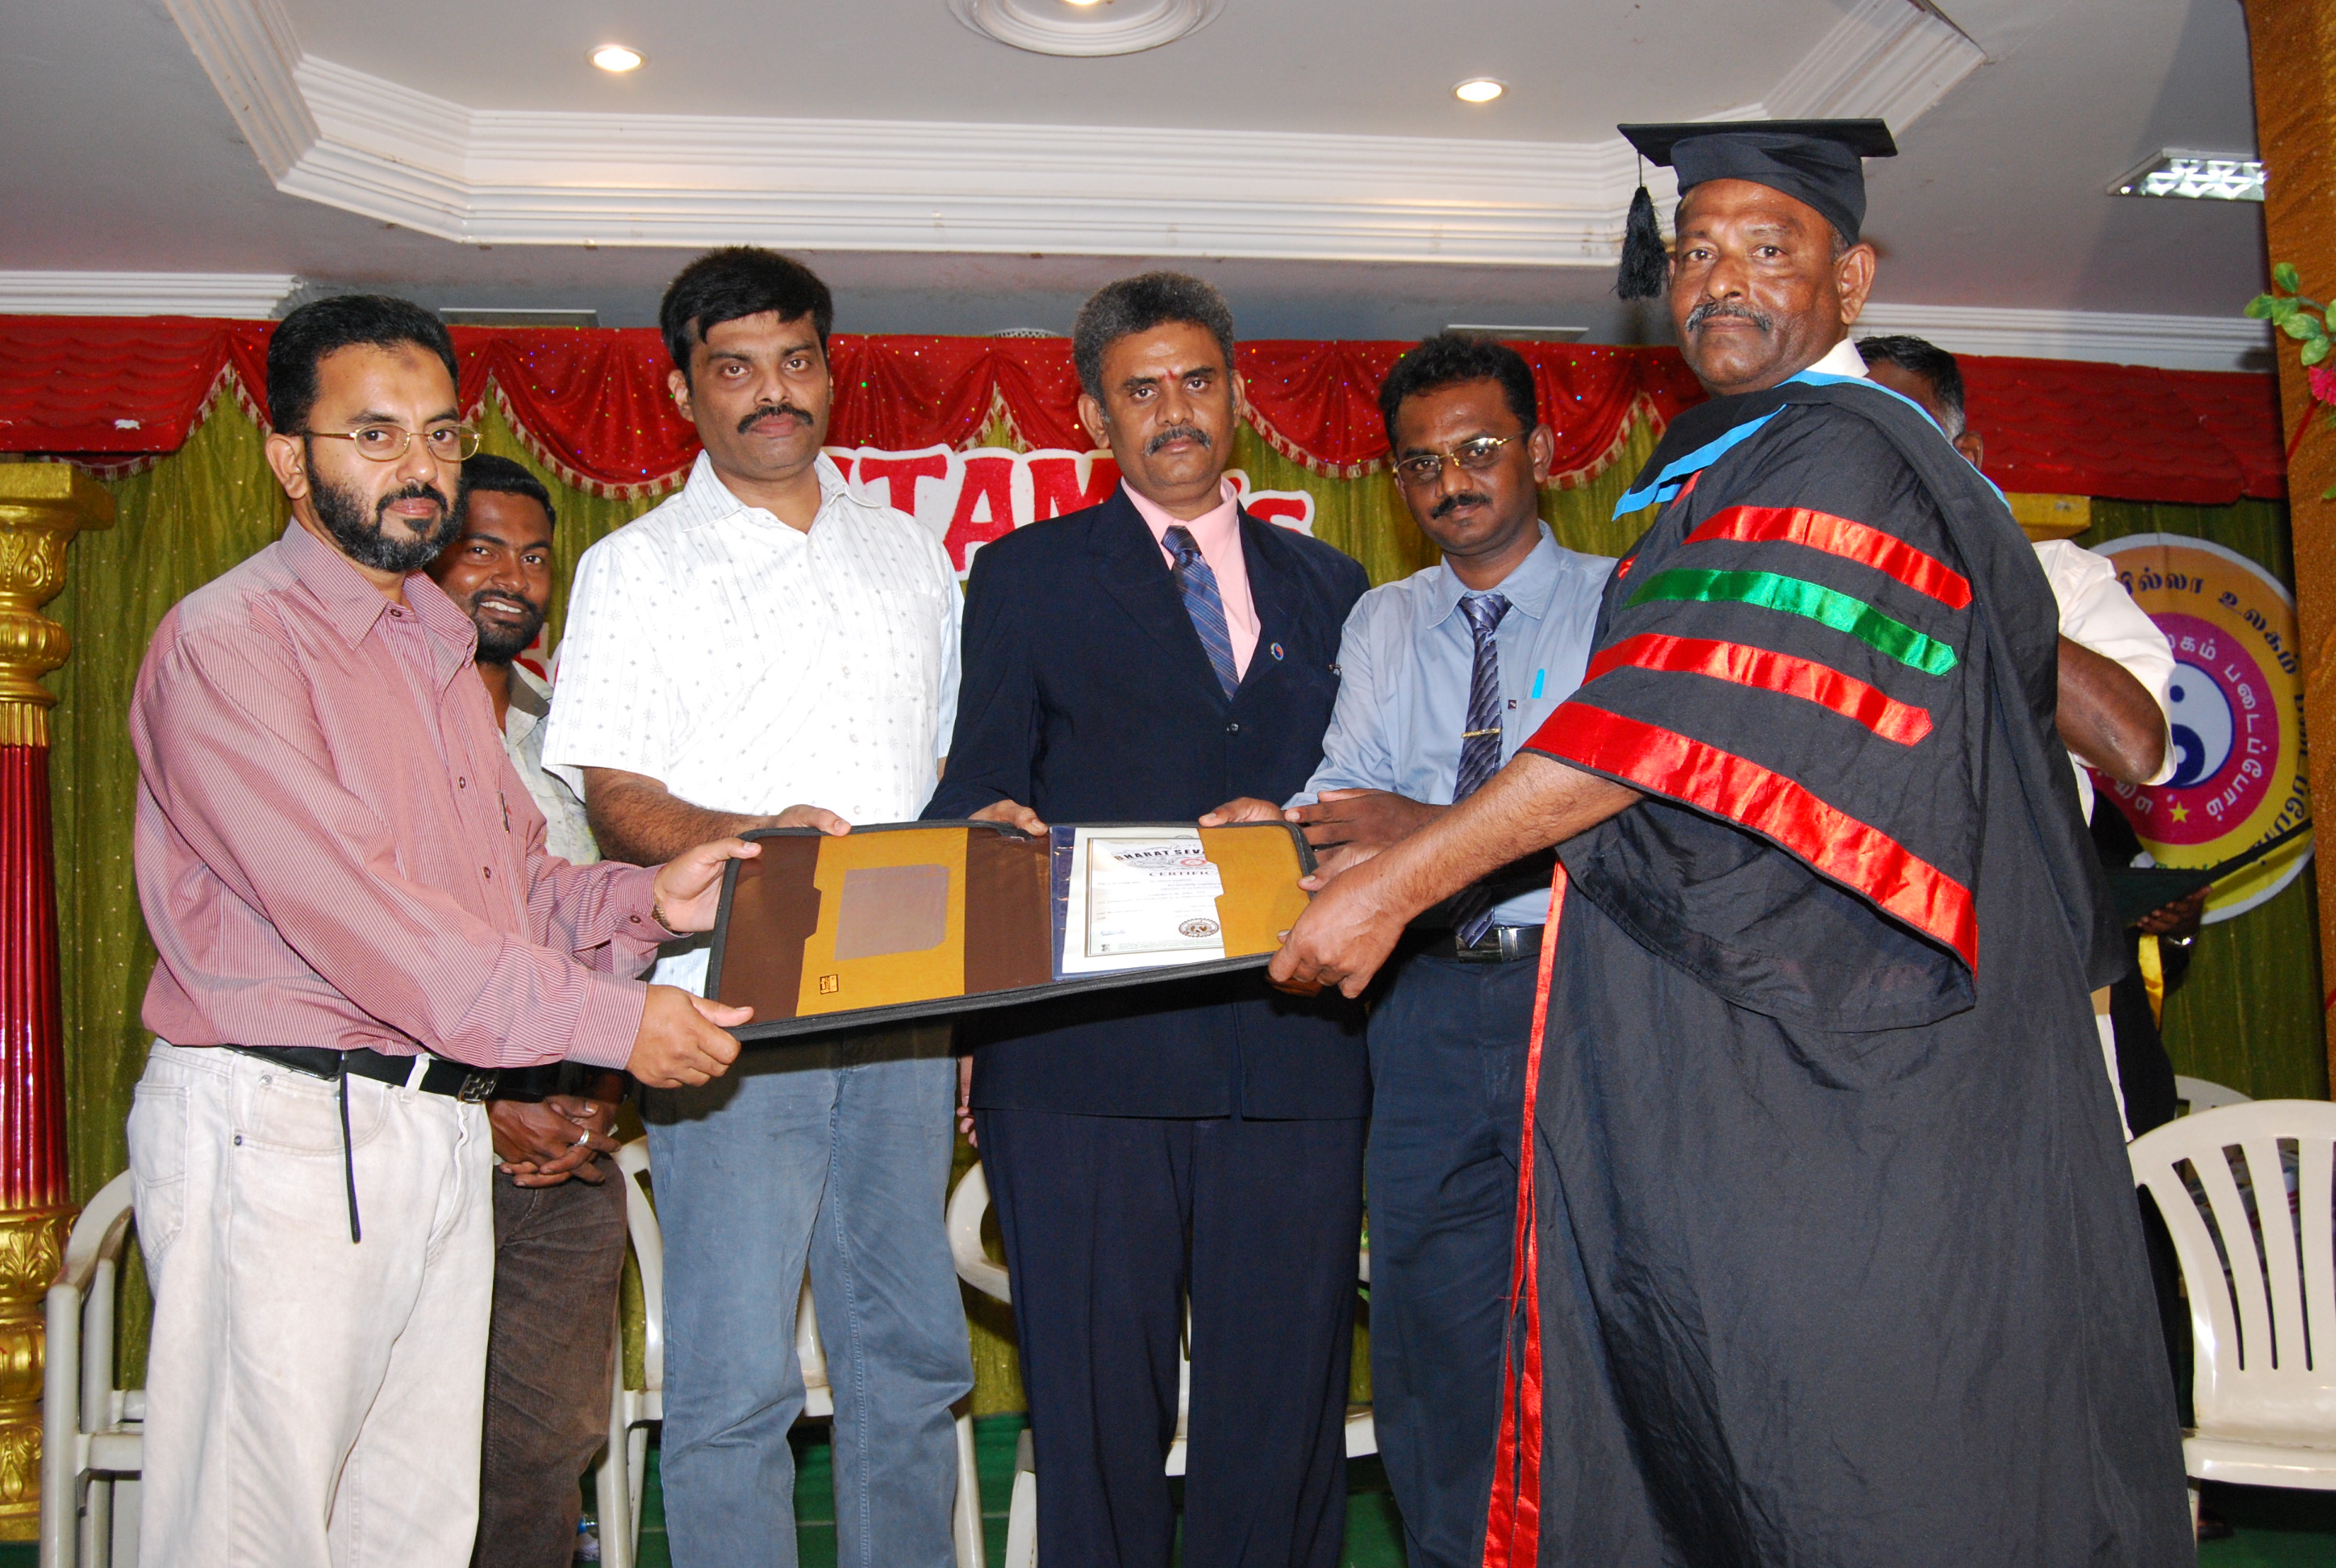 Issuing Acu. Diploma Certificates to Diploma holders